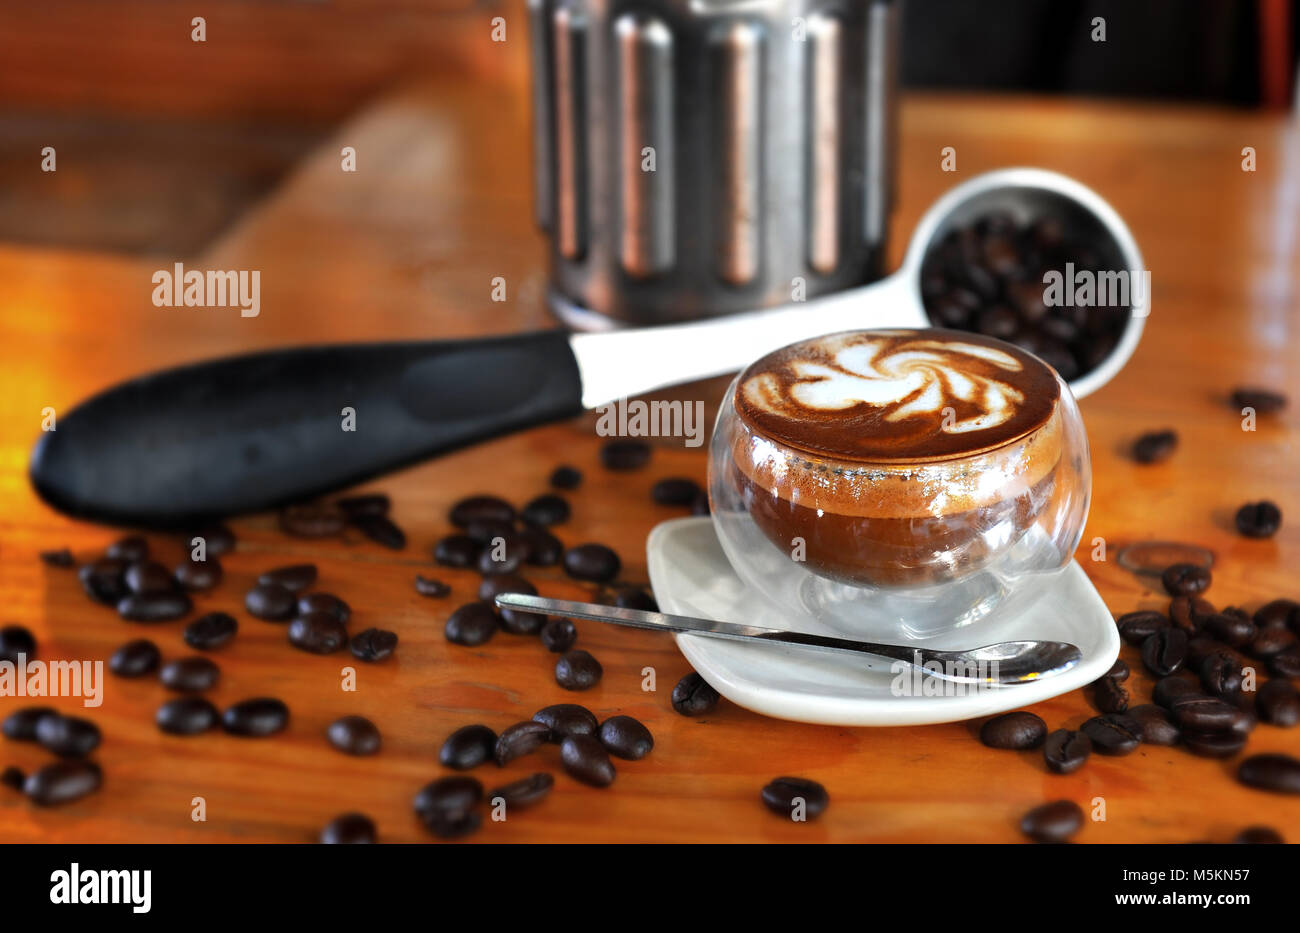 Coffee time one cup or glass of great coffee made fresh life Stock Photo